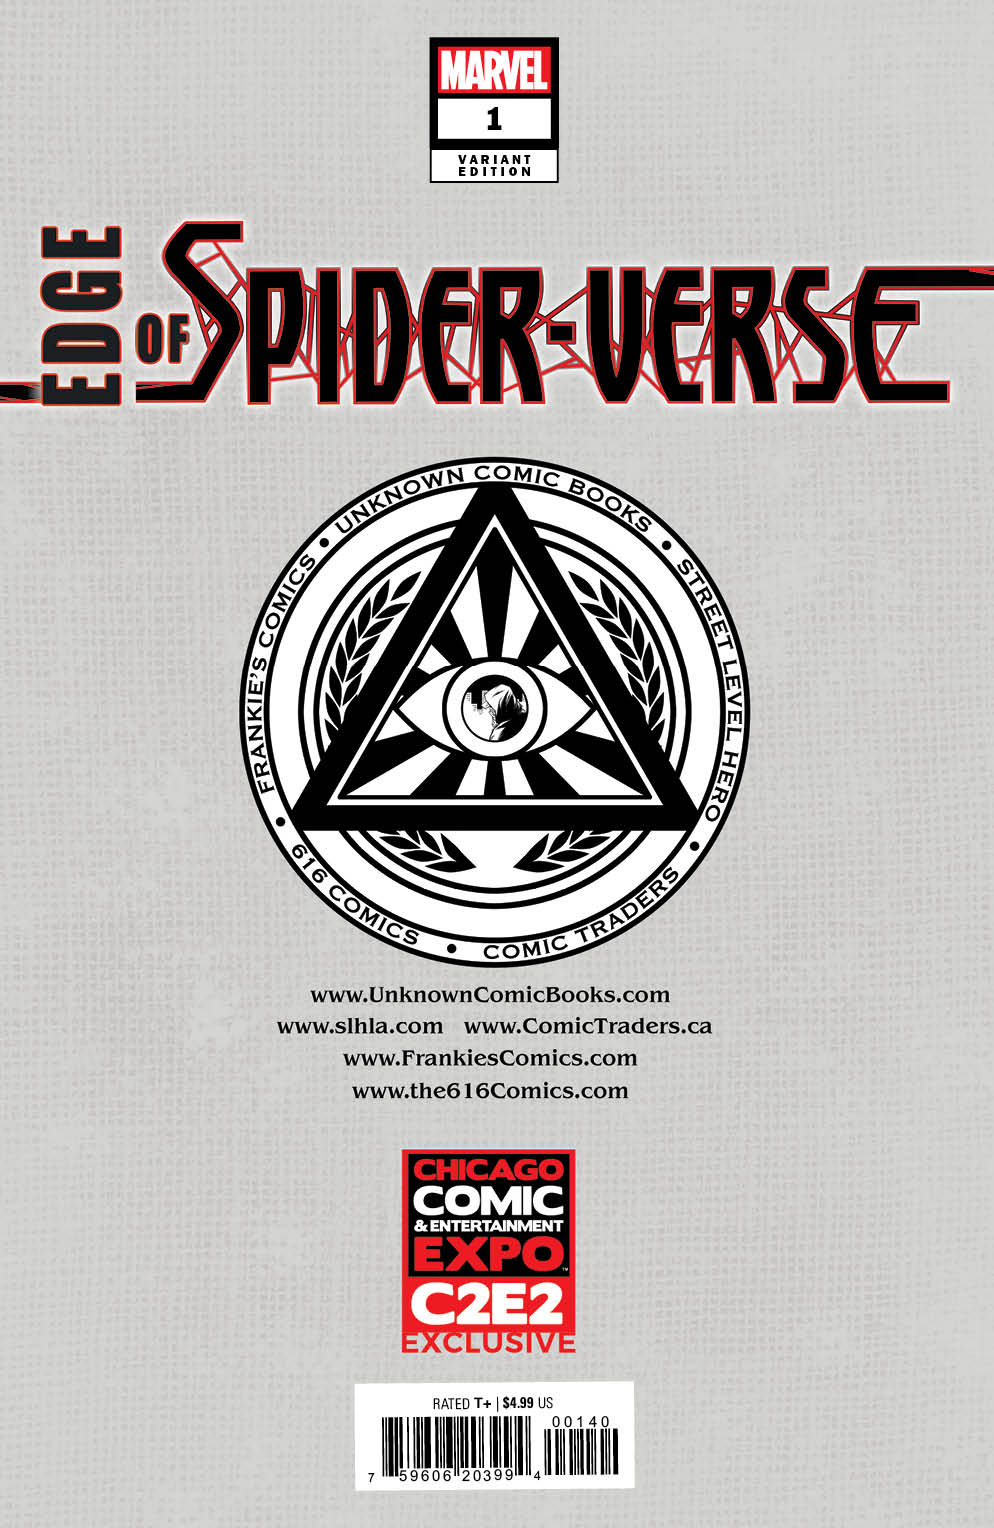 [5 PACK] EDGE OF SPIDER-VERSE (#1-#5) 1, 2, 3, 4, 5 UNKNOWN COMICS TYLER KIRKHAM EXCLUSIVE C2E2/NYCC BUNDLE (10/19/2022)